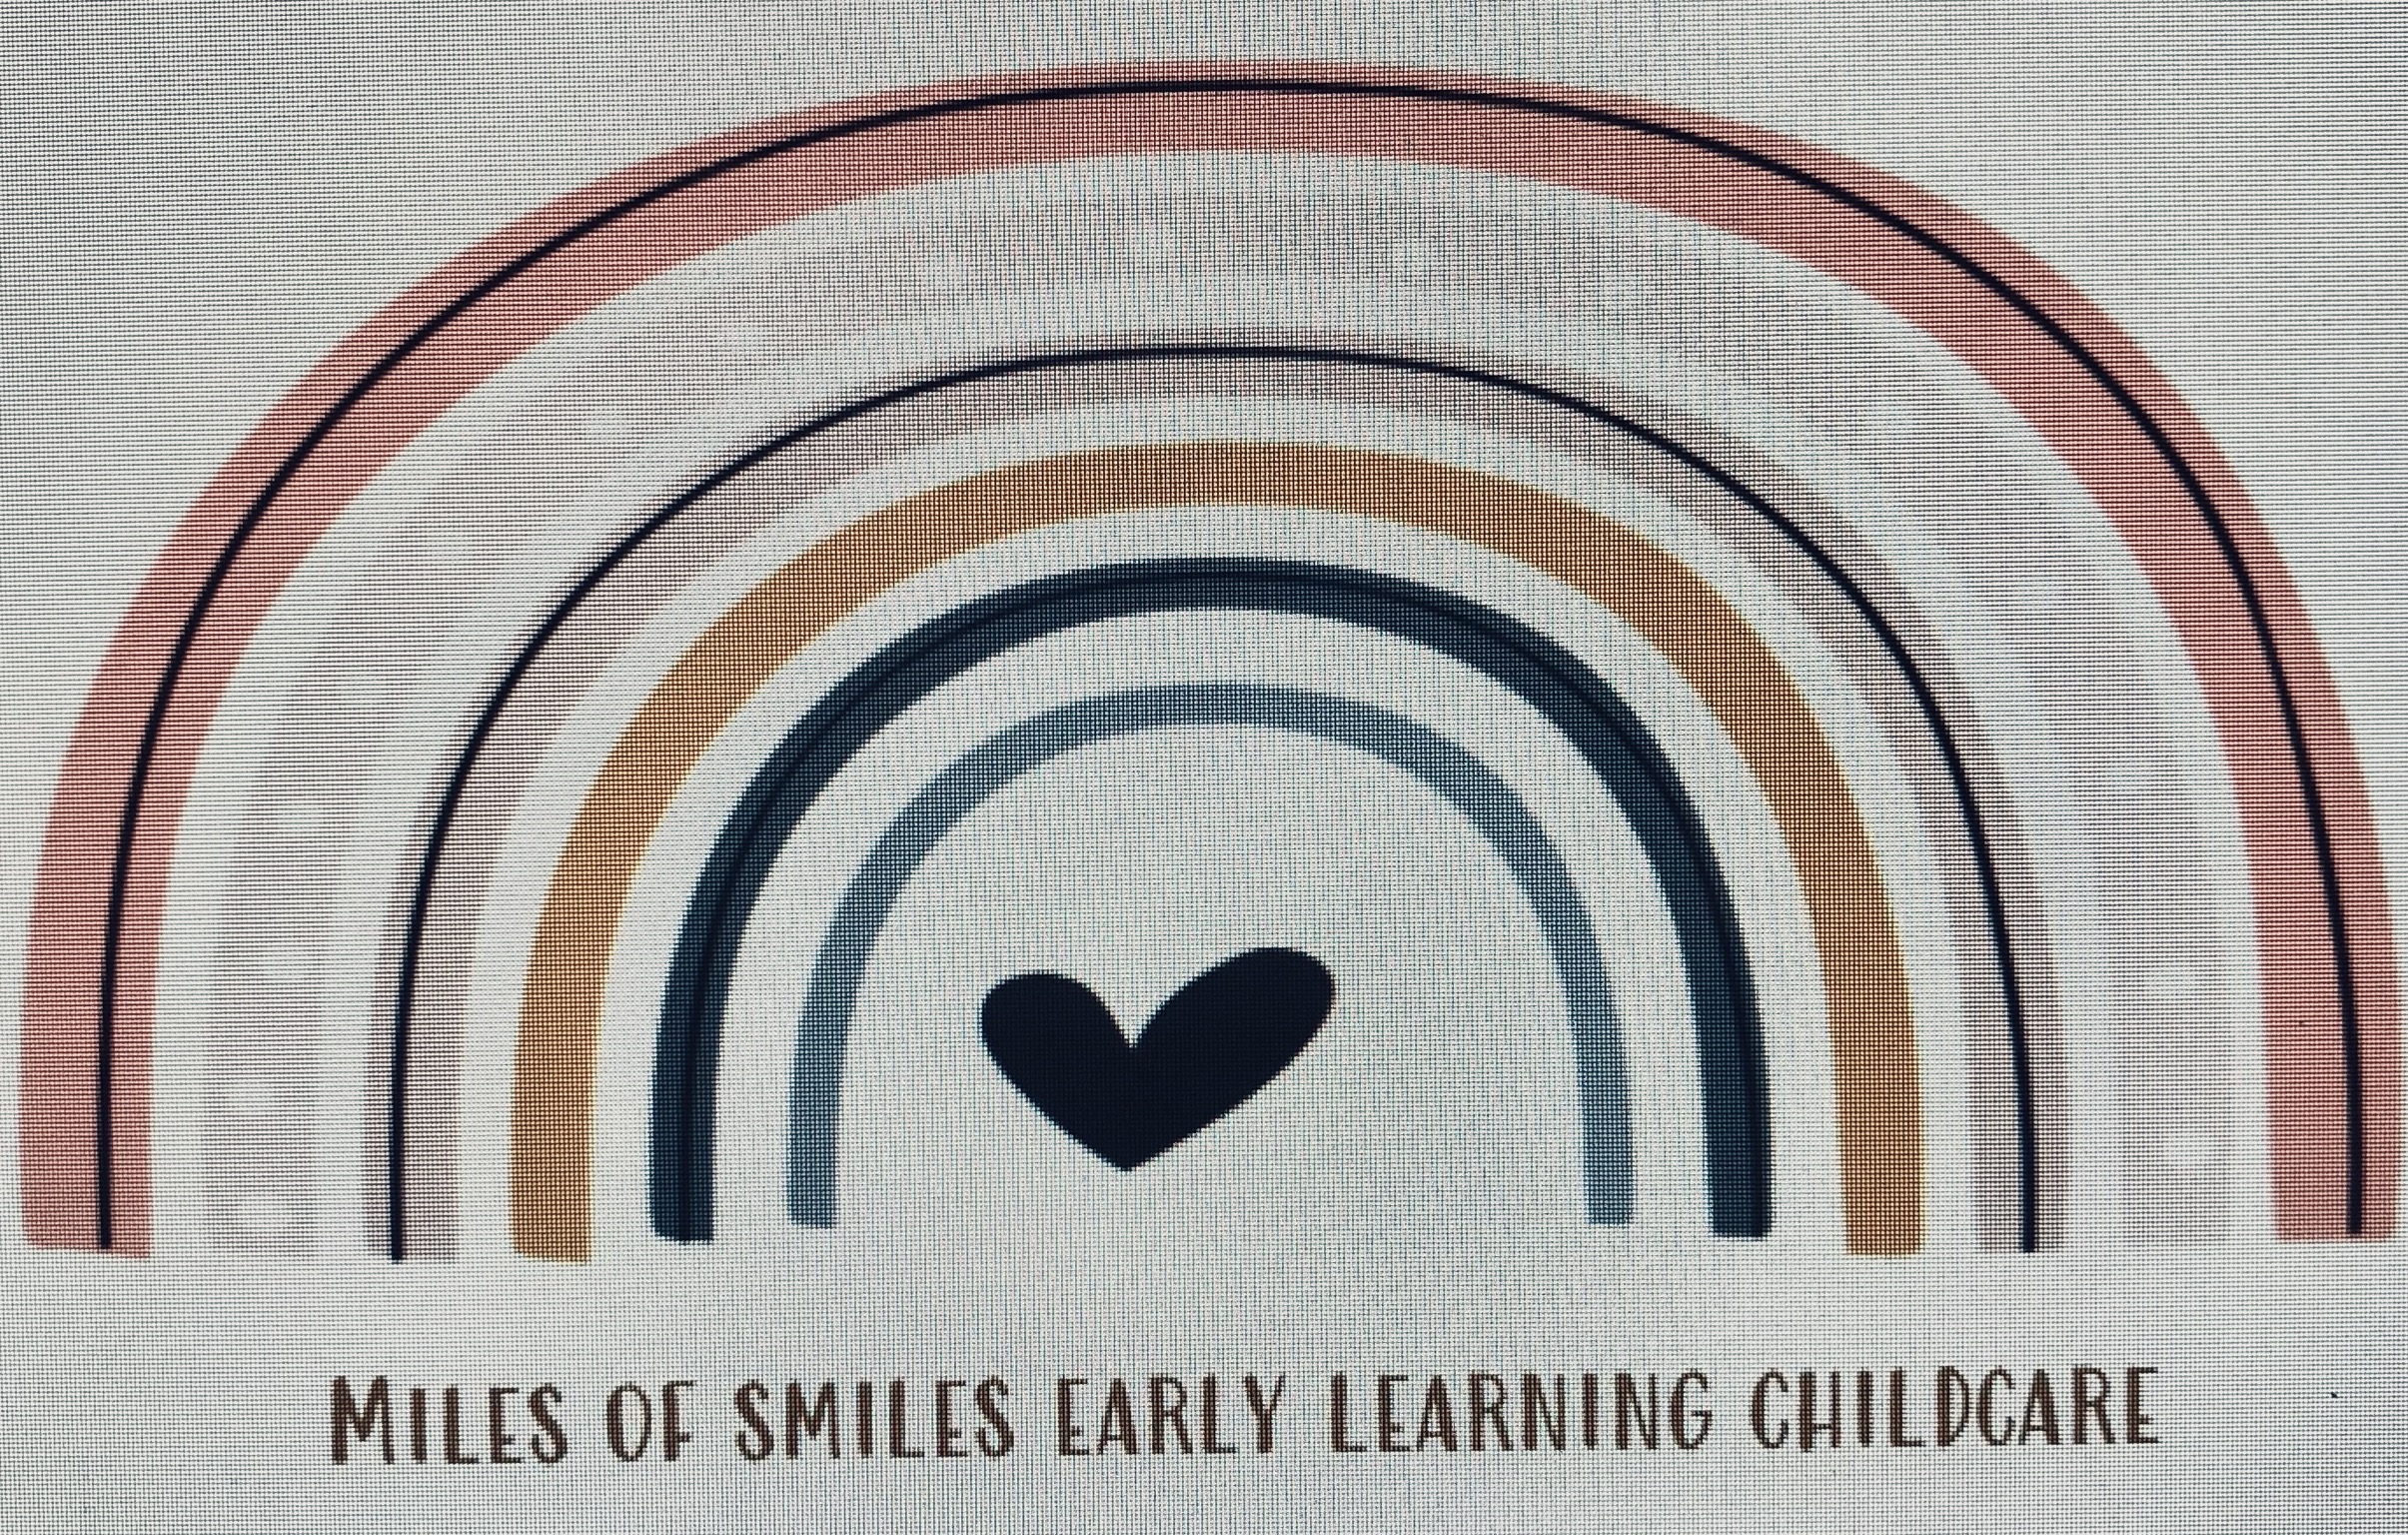 Miles of smiles early learning childcare